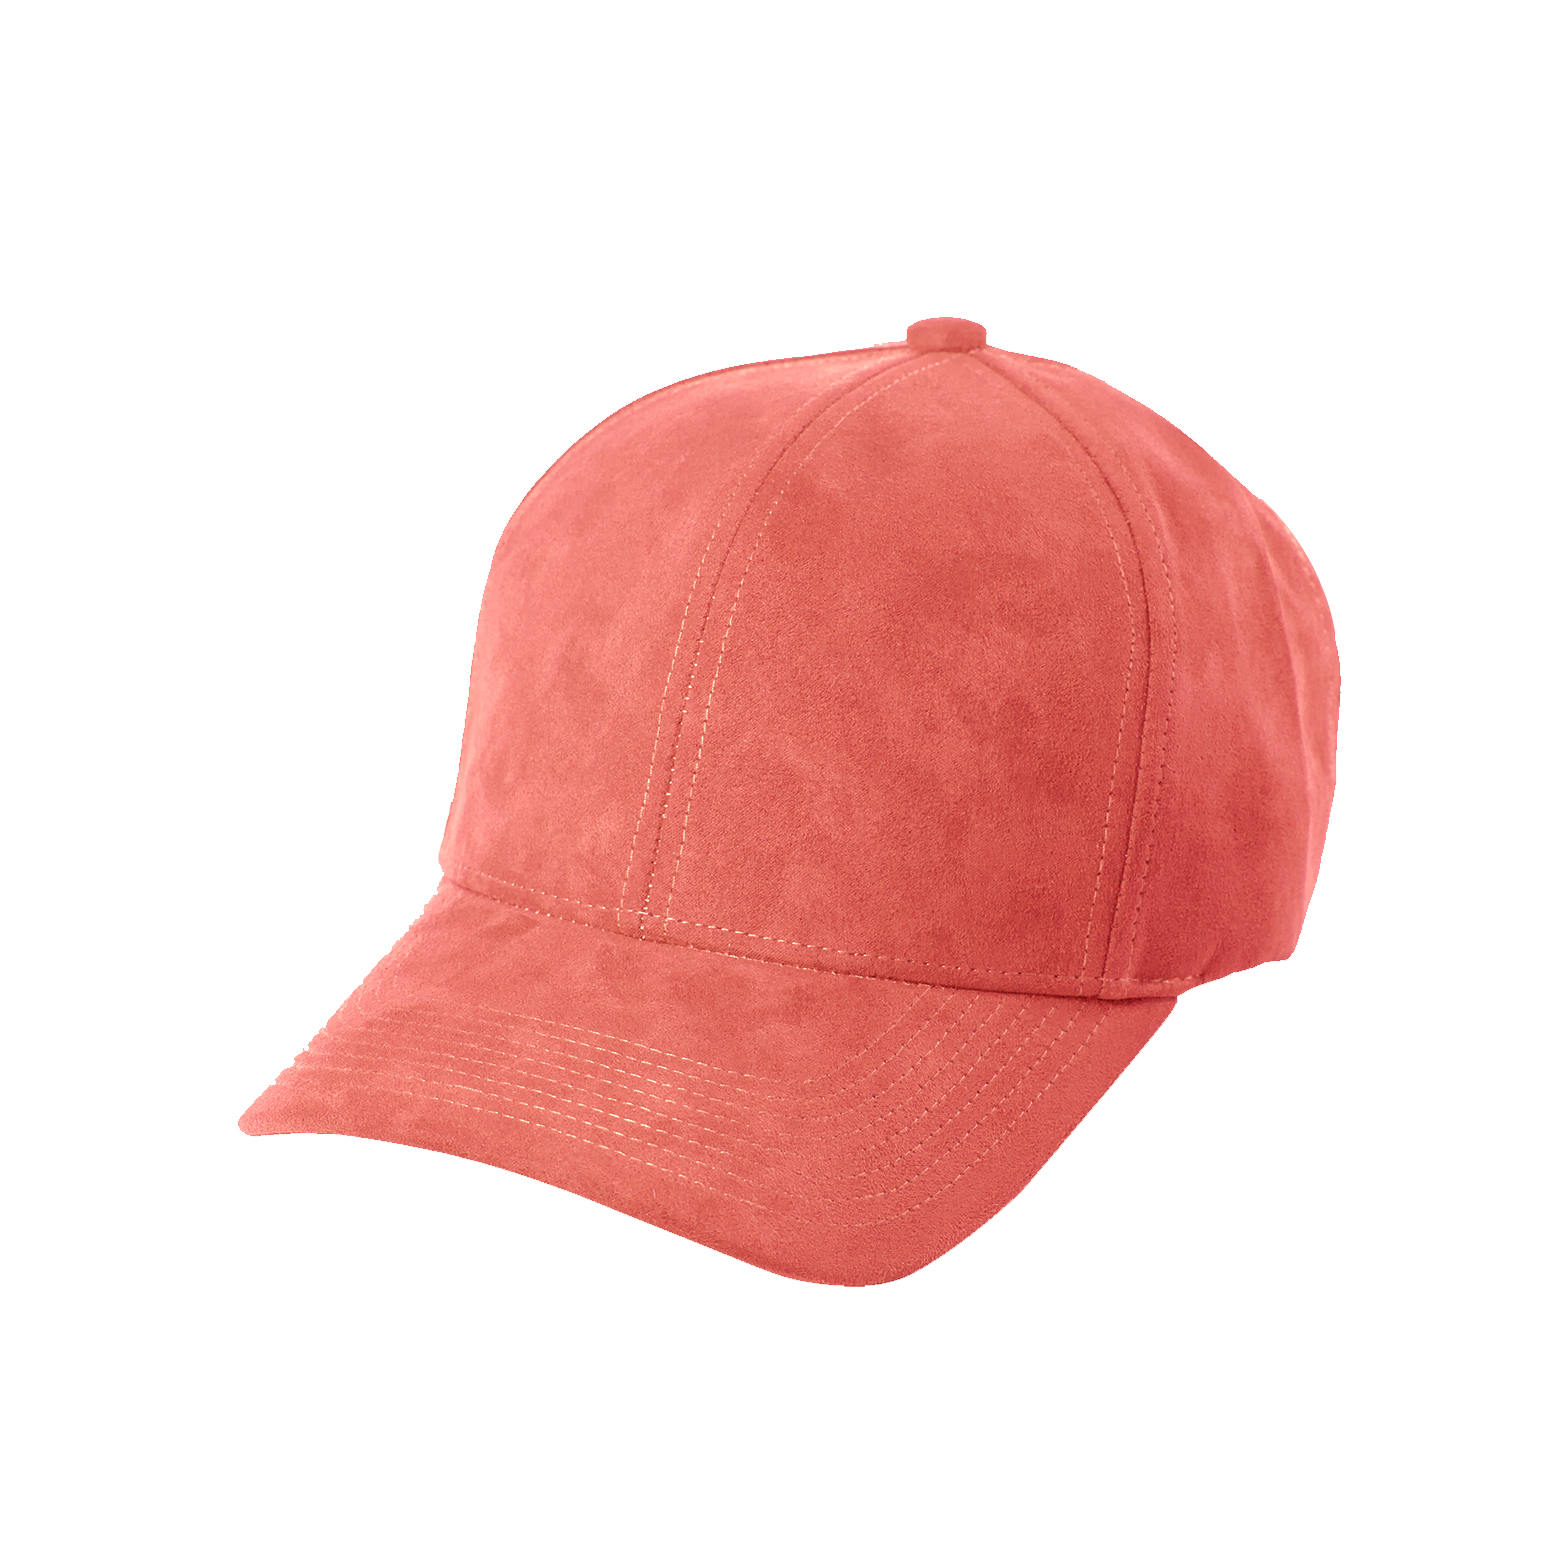 BASEBALL CAP PEACH SUEDE FRONT SIDE